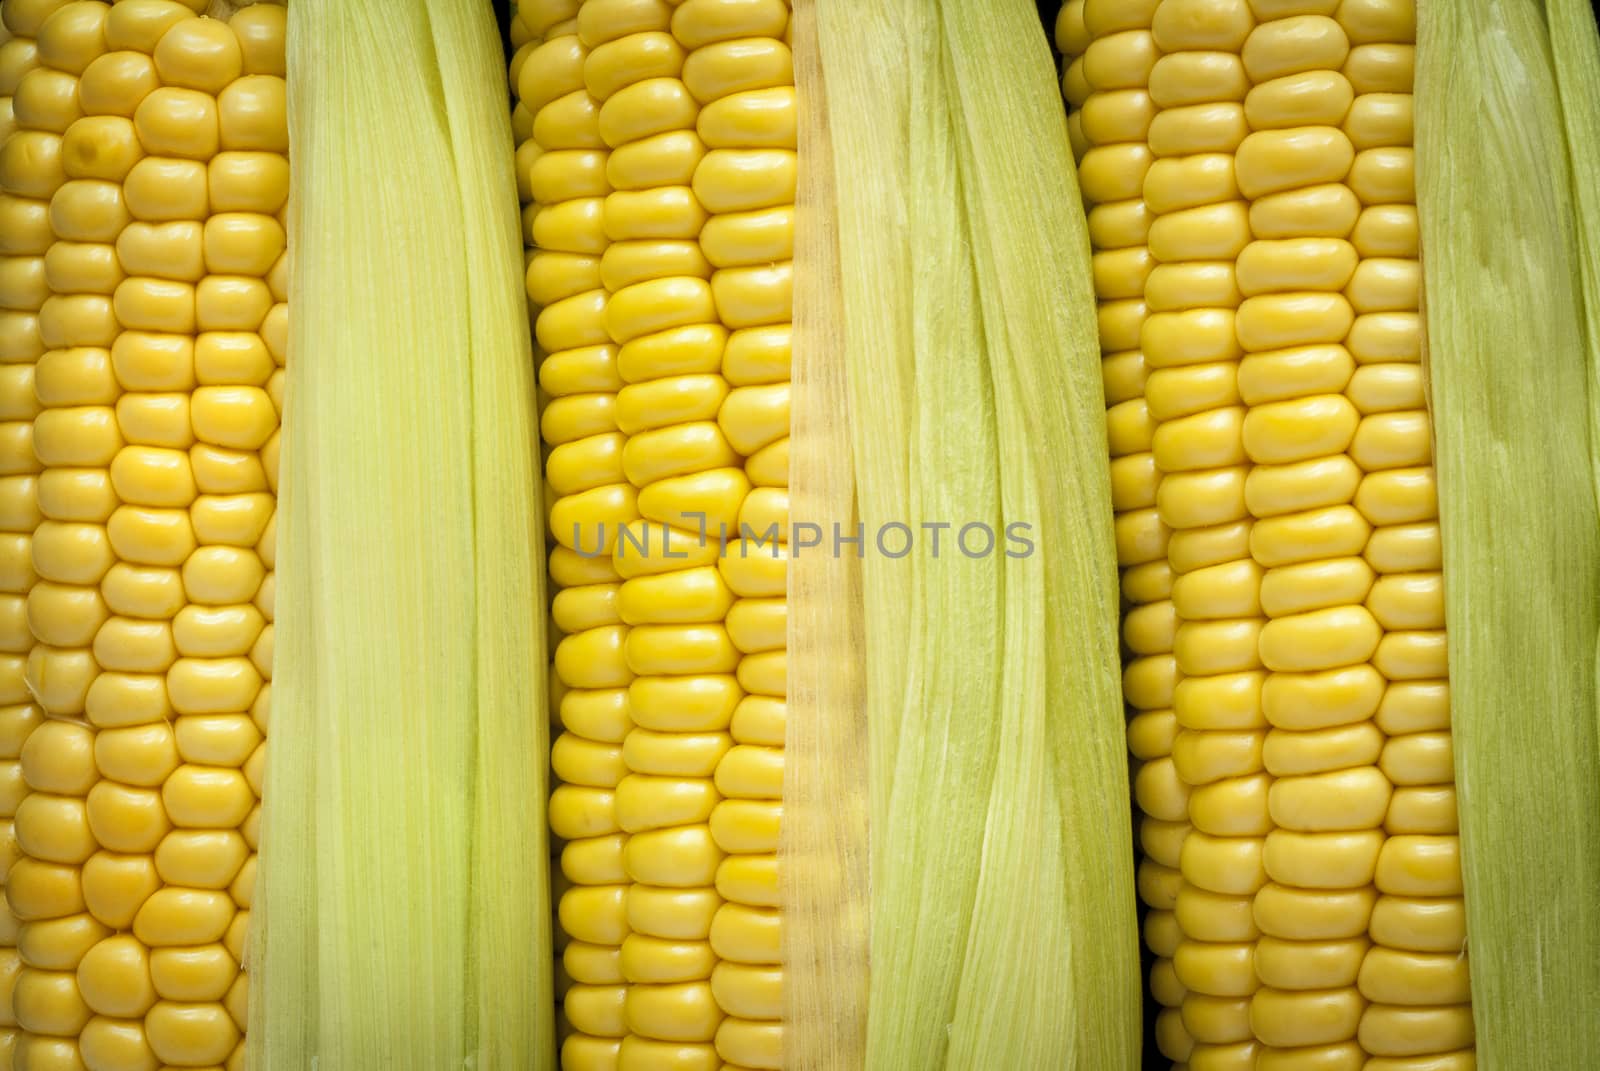 Closeup image of golden corn on the cob with husks.